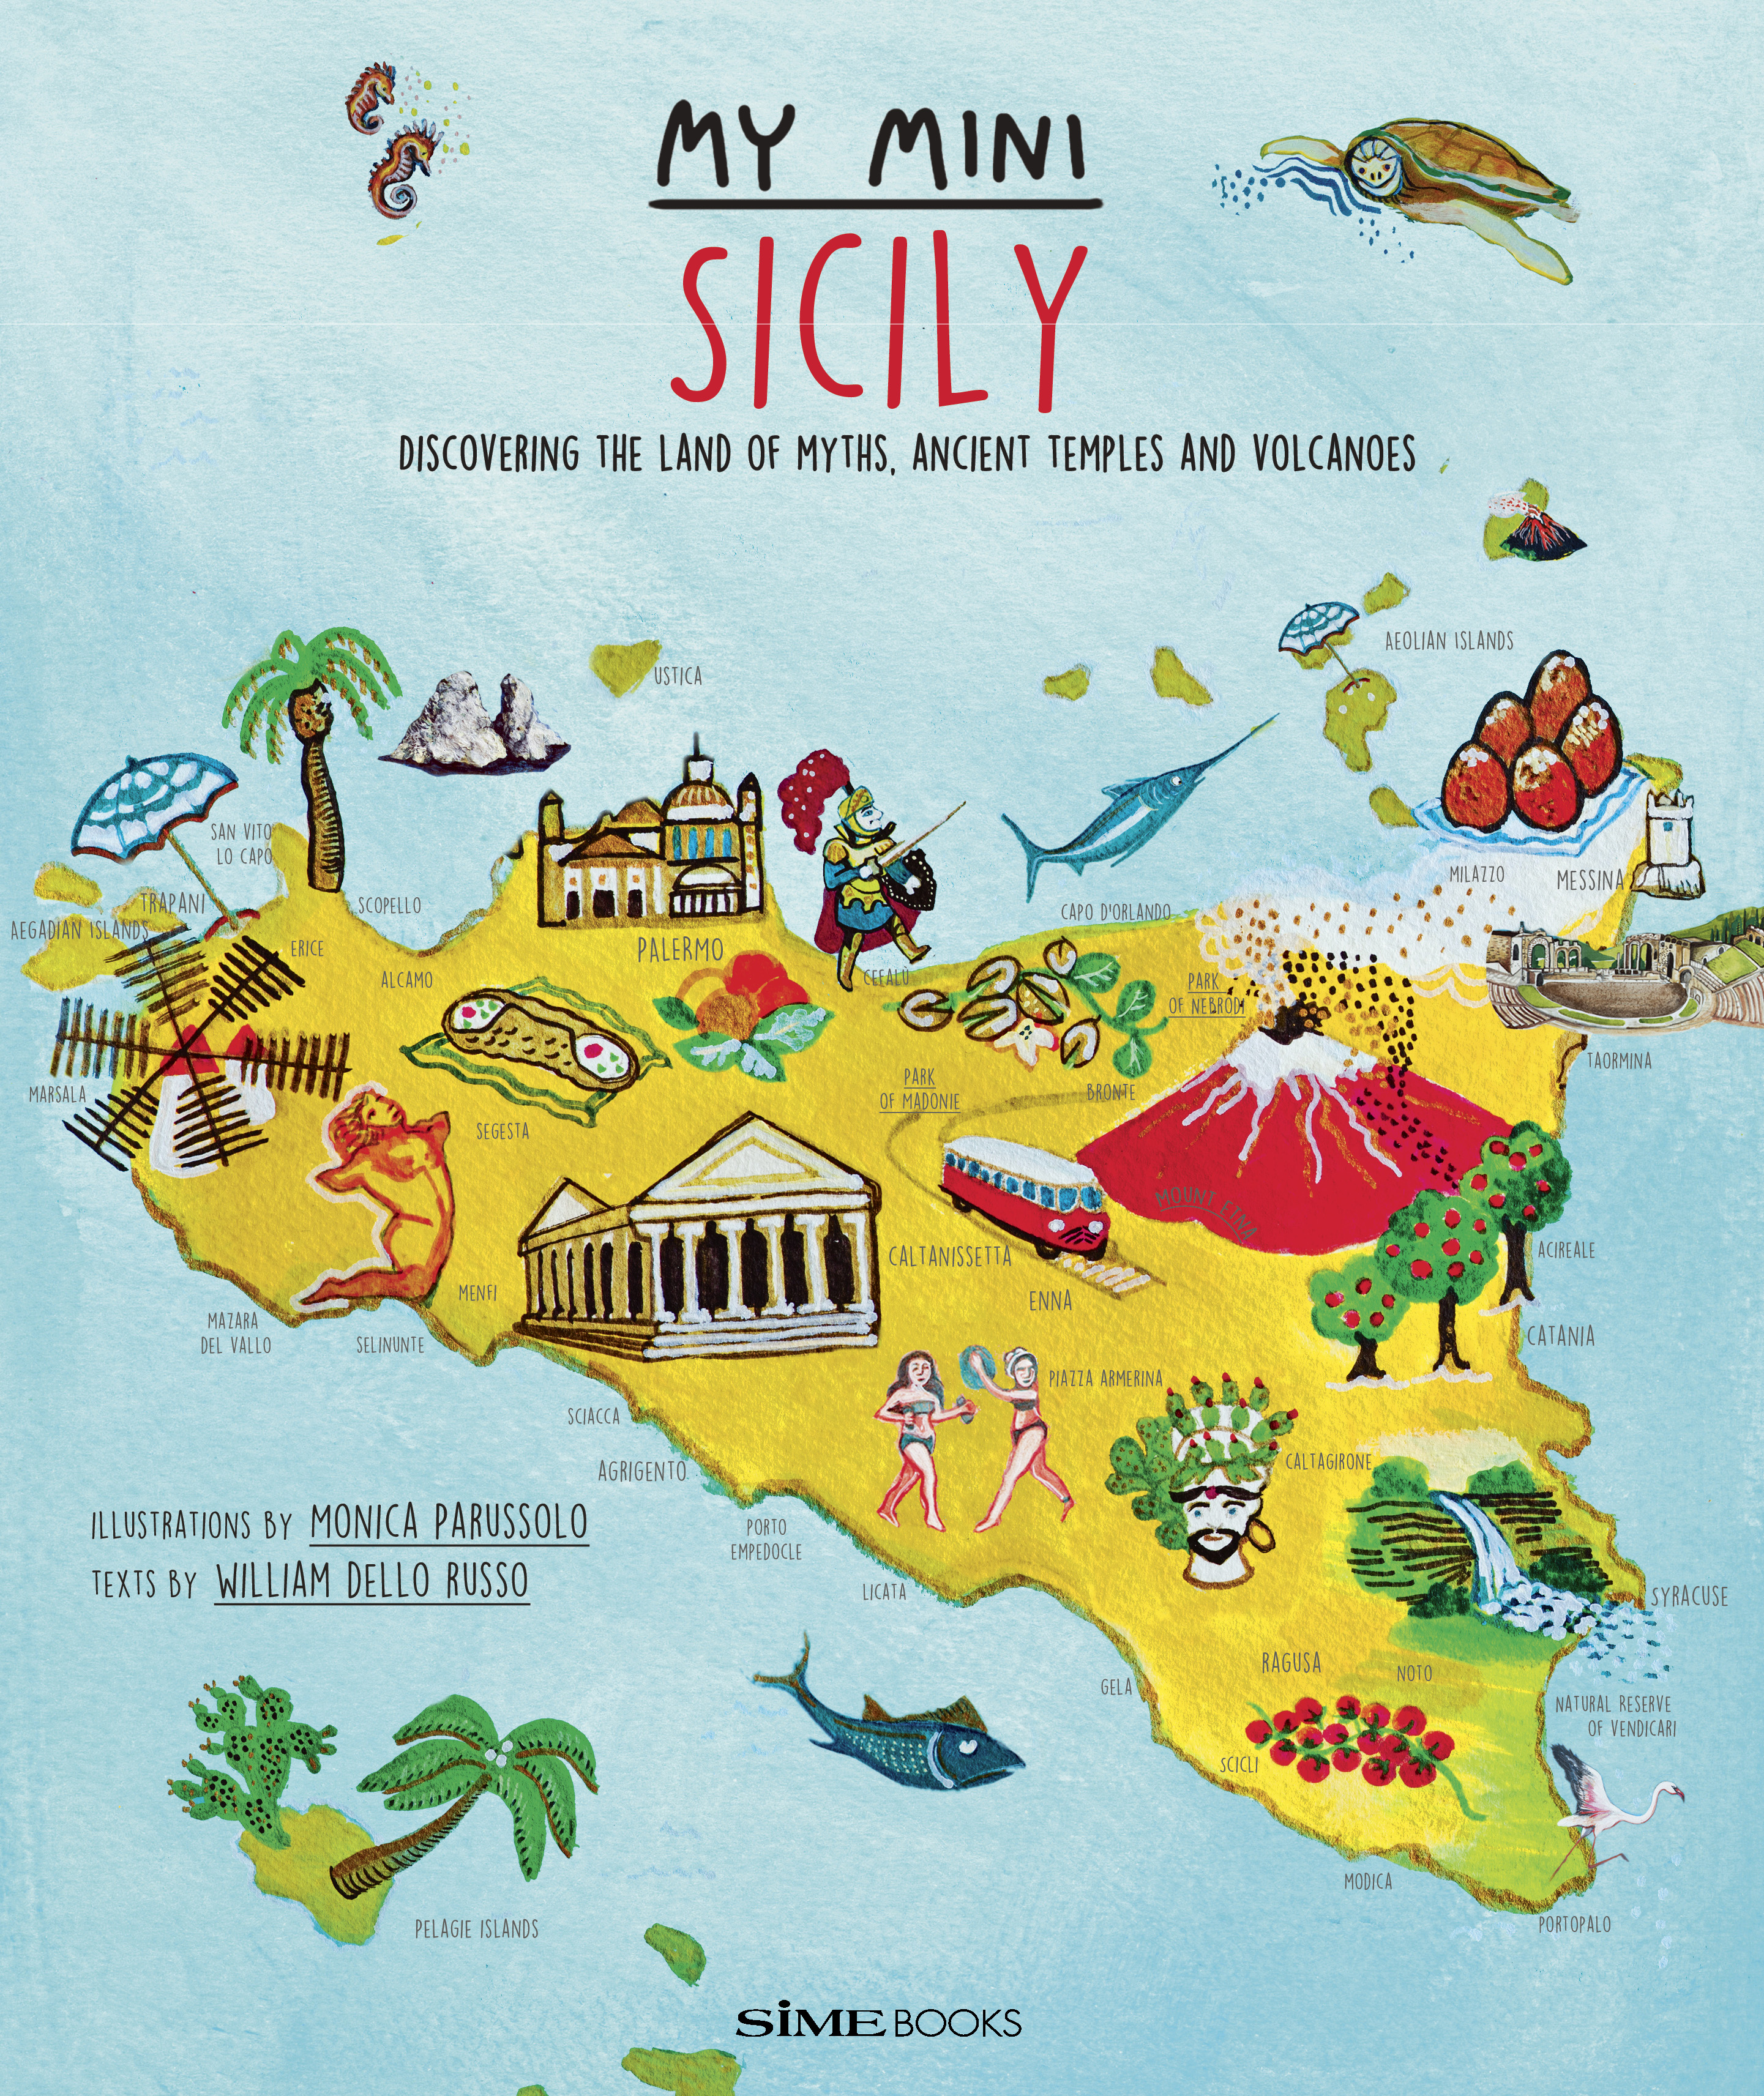 New Images > My Mini Sicily Discovering the land of myths, ancient temples and volcanoes